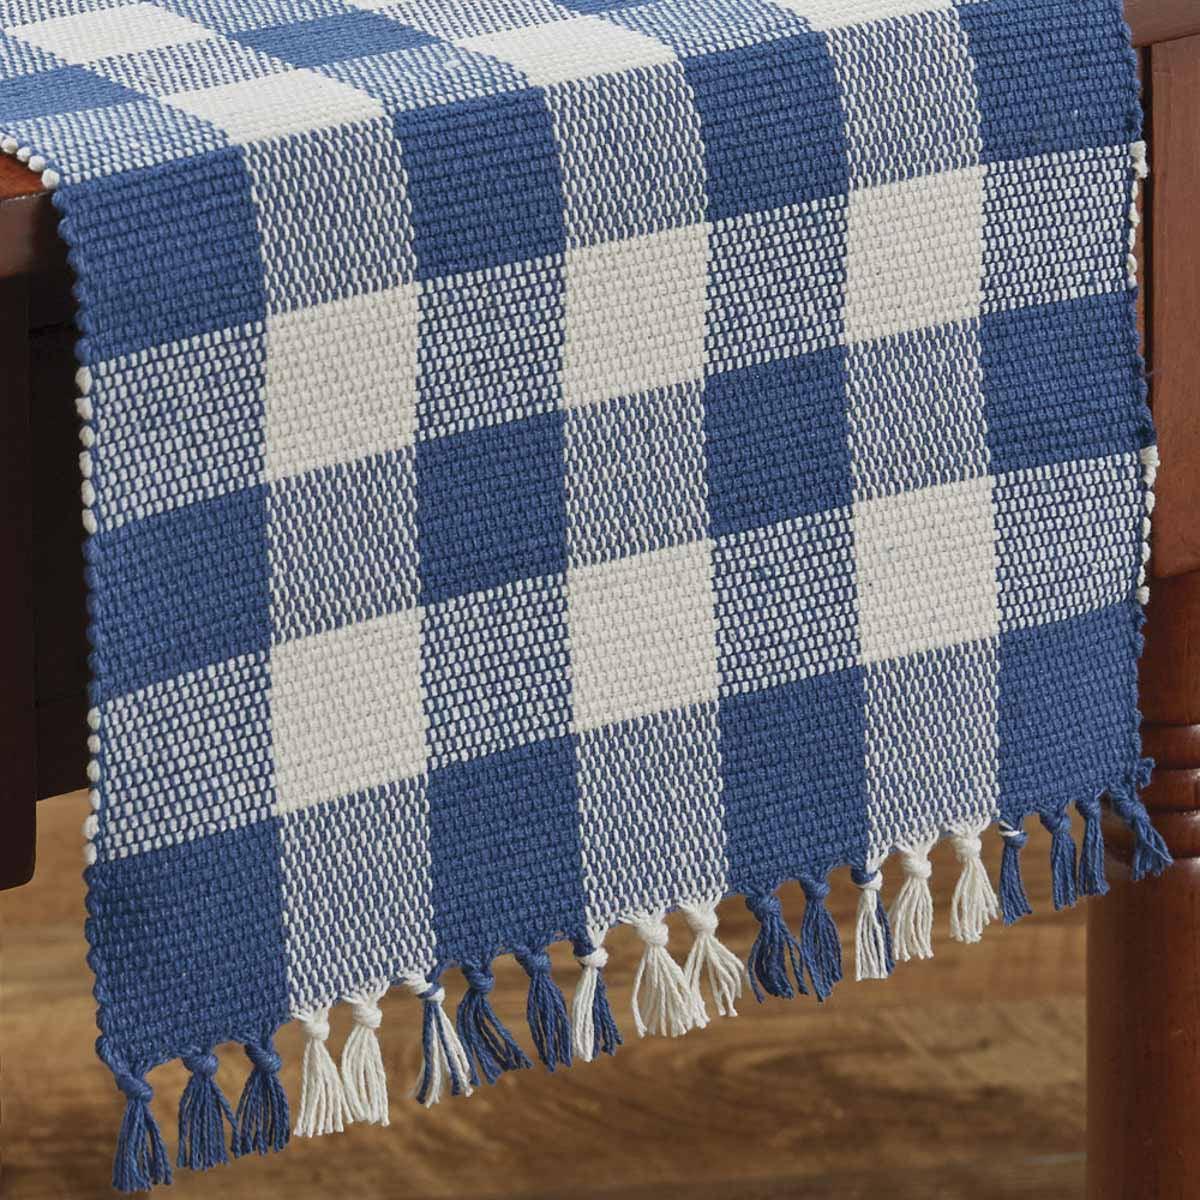 Wicklow Check Table Runner - China Blue Park Designs - The Fox Decor